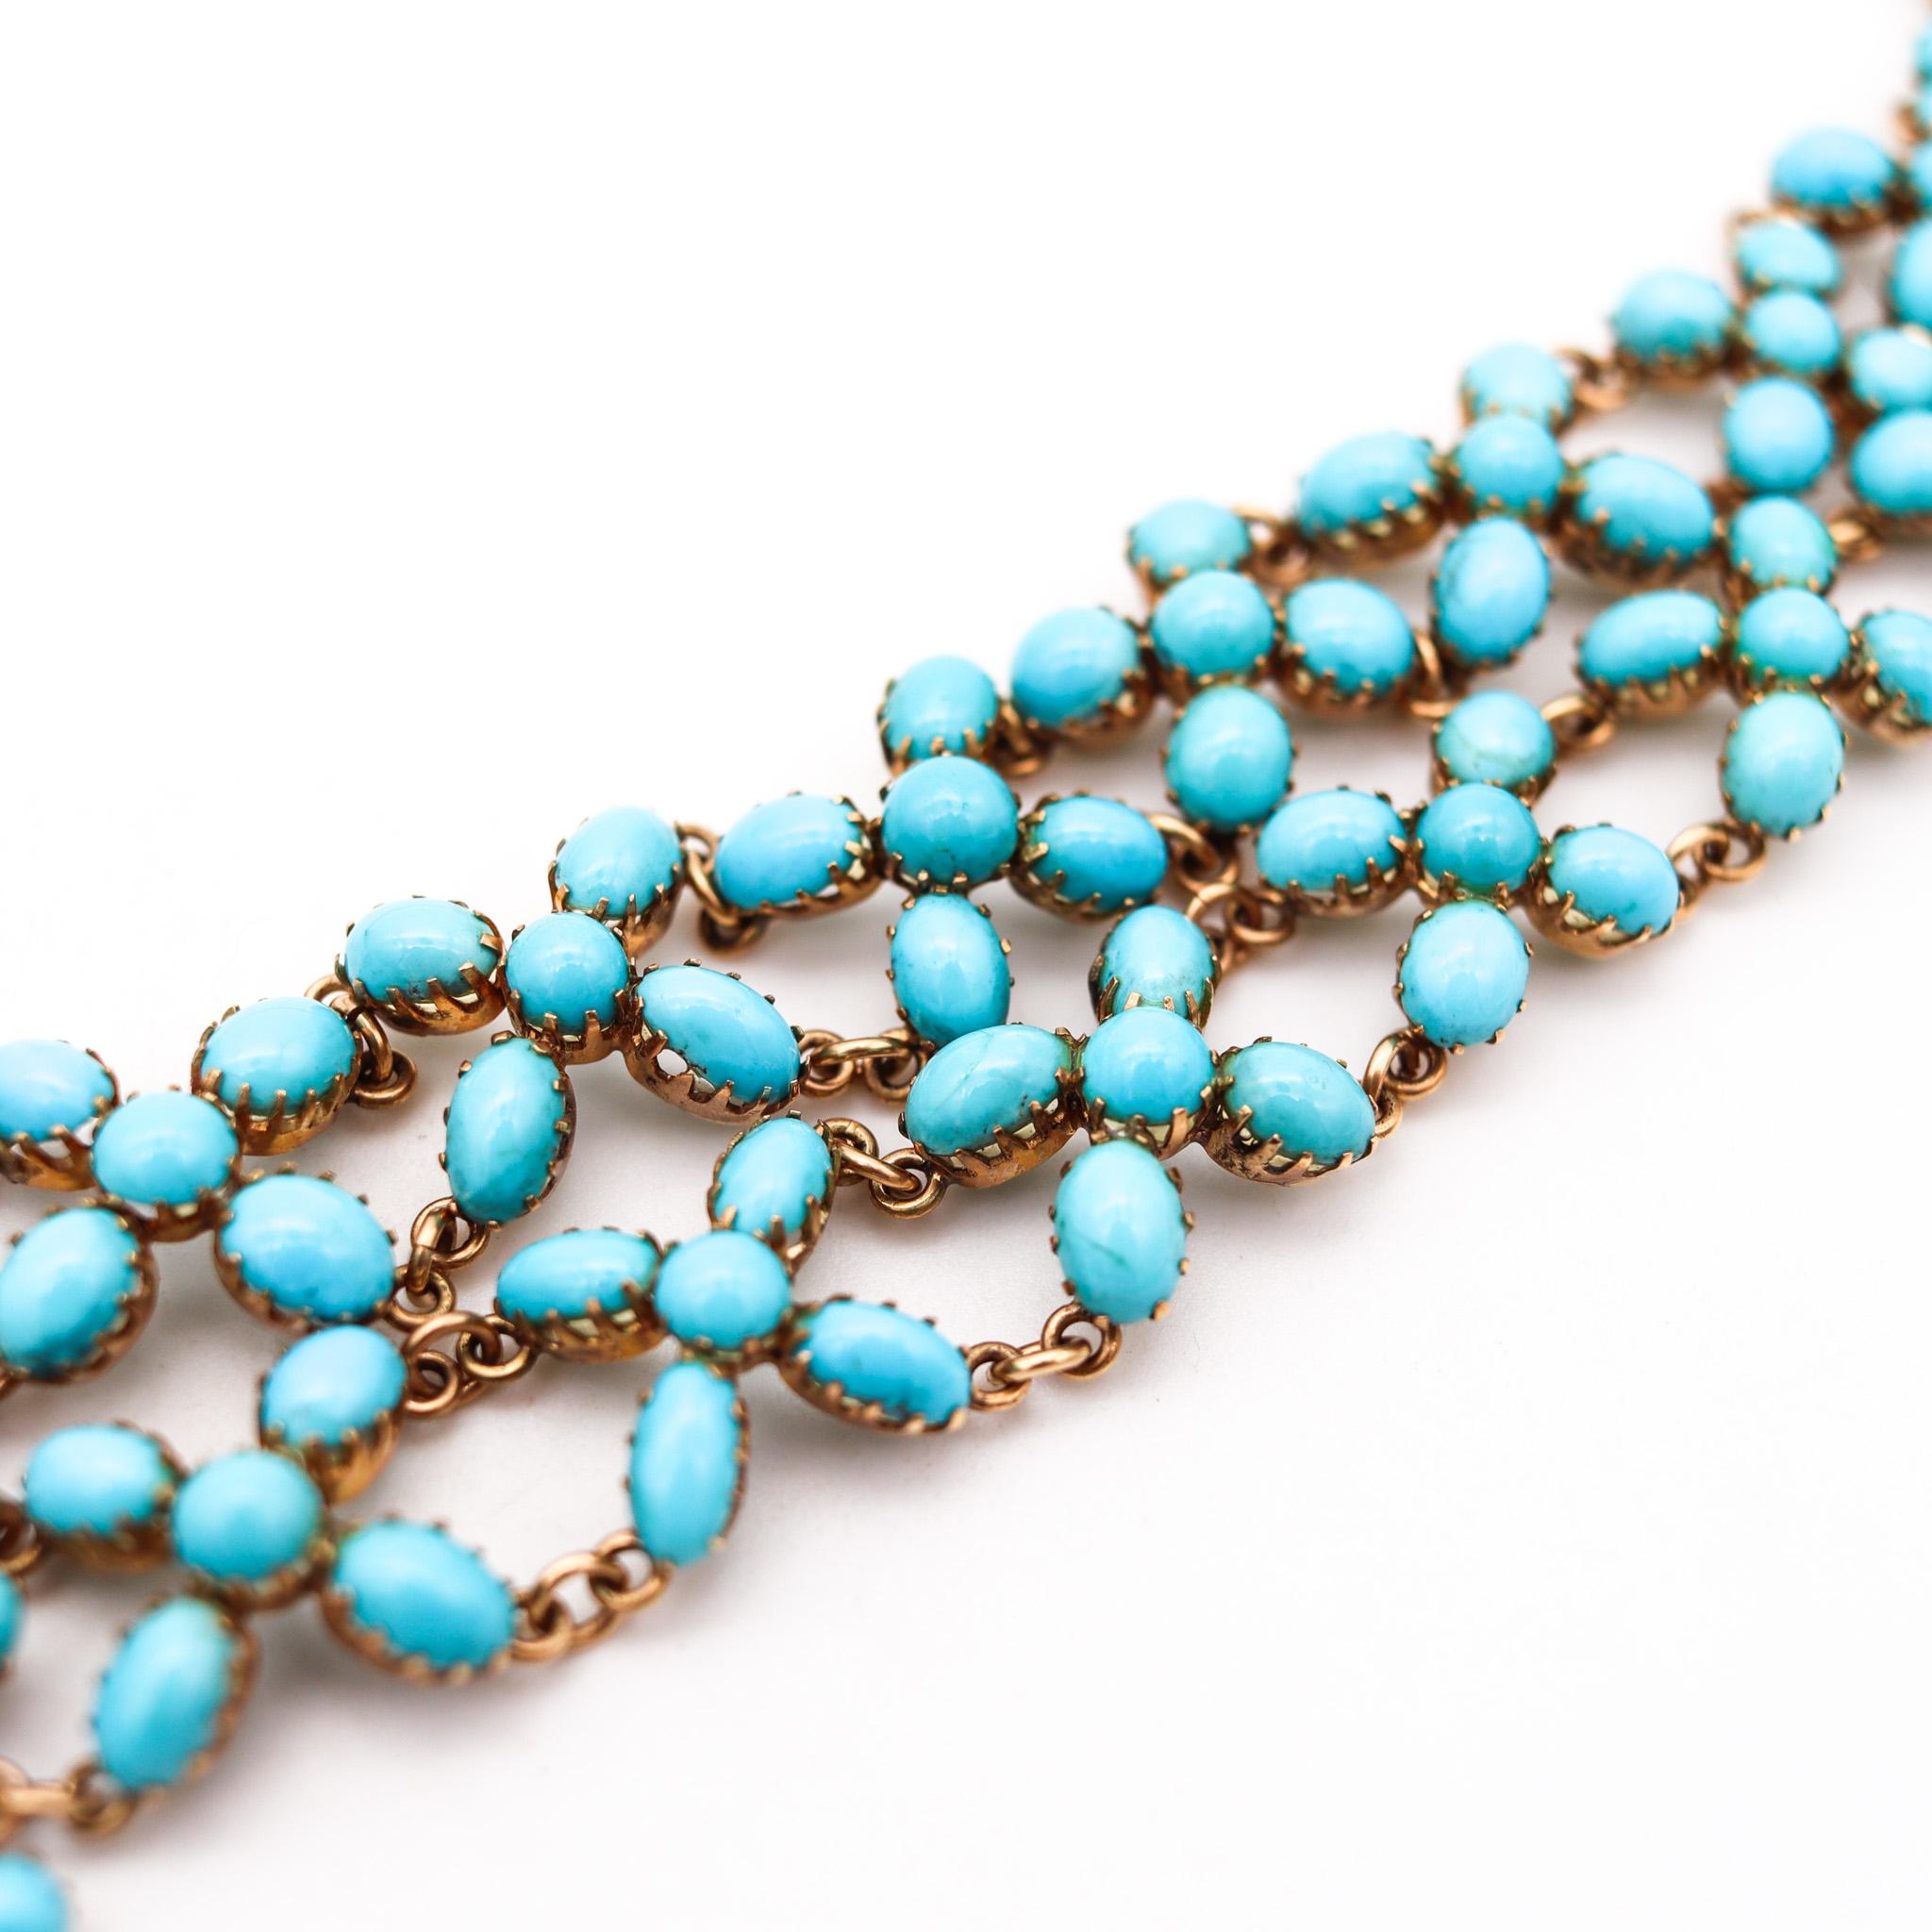 Mixed Cut Victorian 1880 Drop Necklace In 14Kt Gold With 187.50 Cts Turquoises & Sapphires